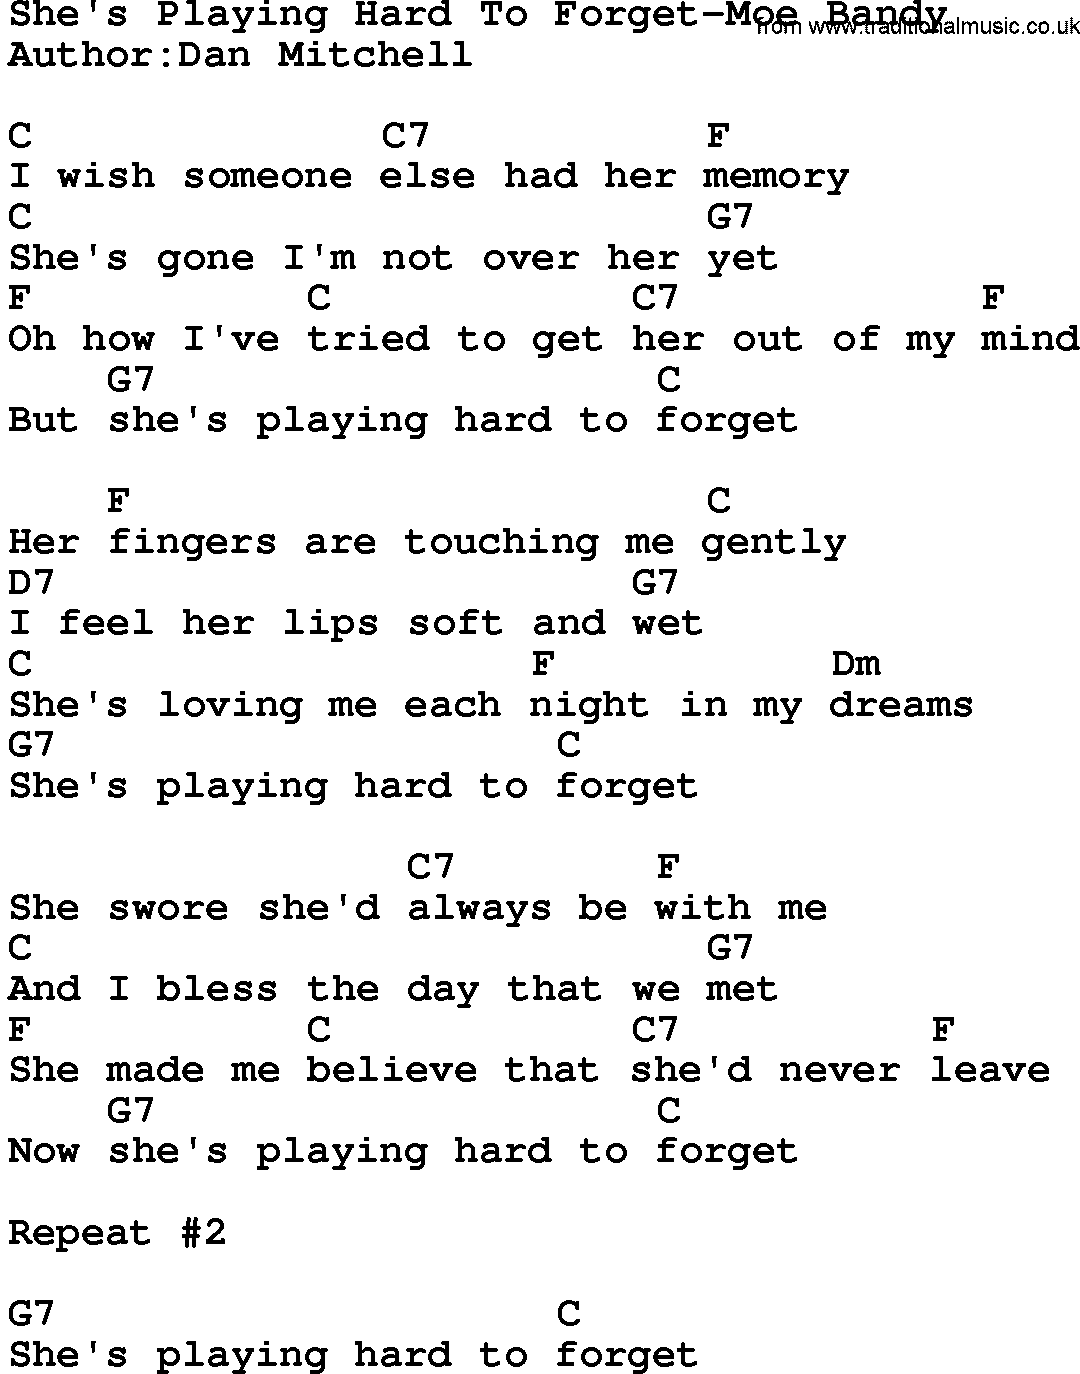 Country music song: She's Playing Hard To Forget-Moe Bandy lyrics and chords